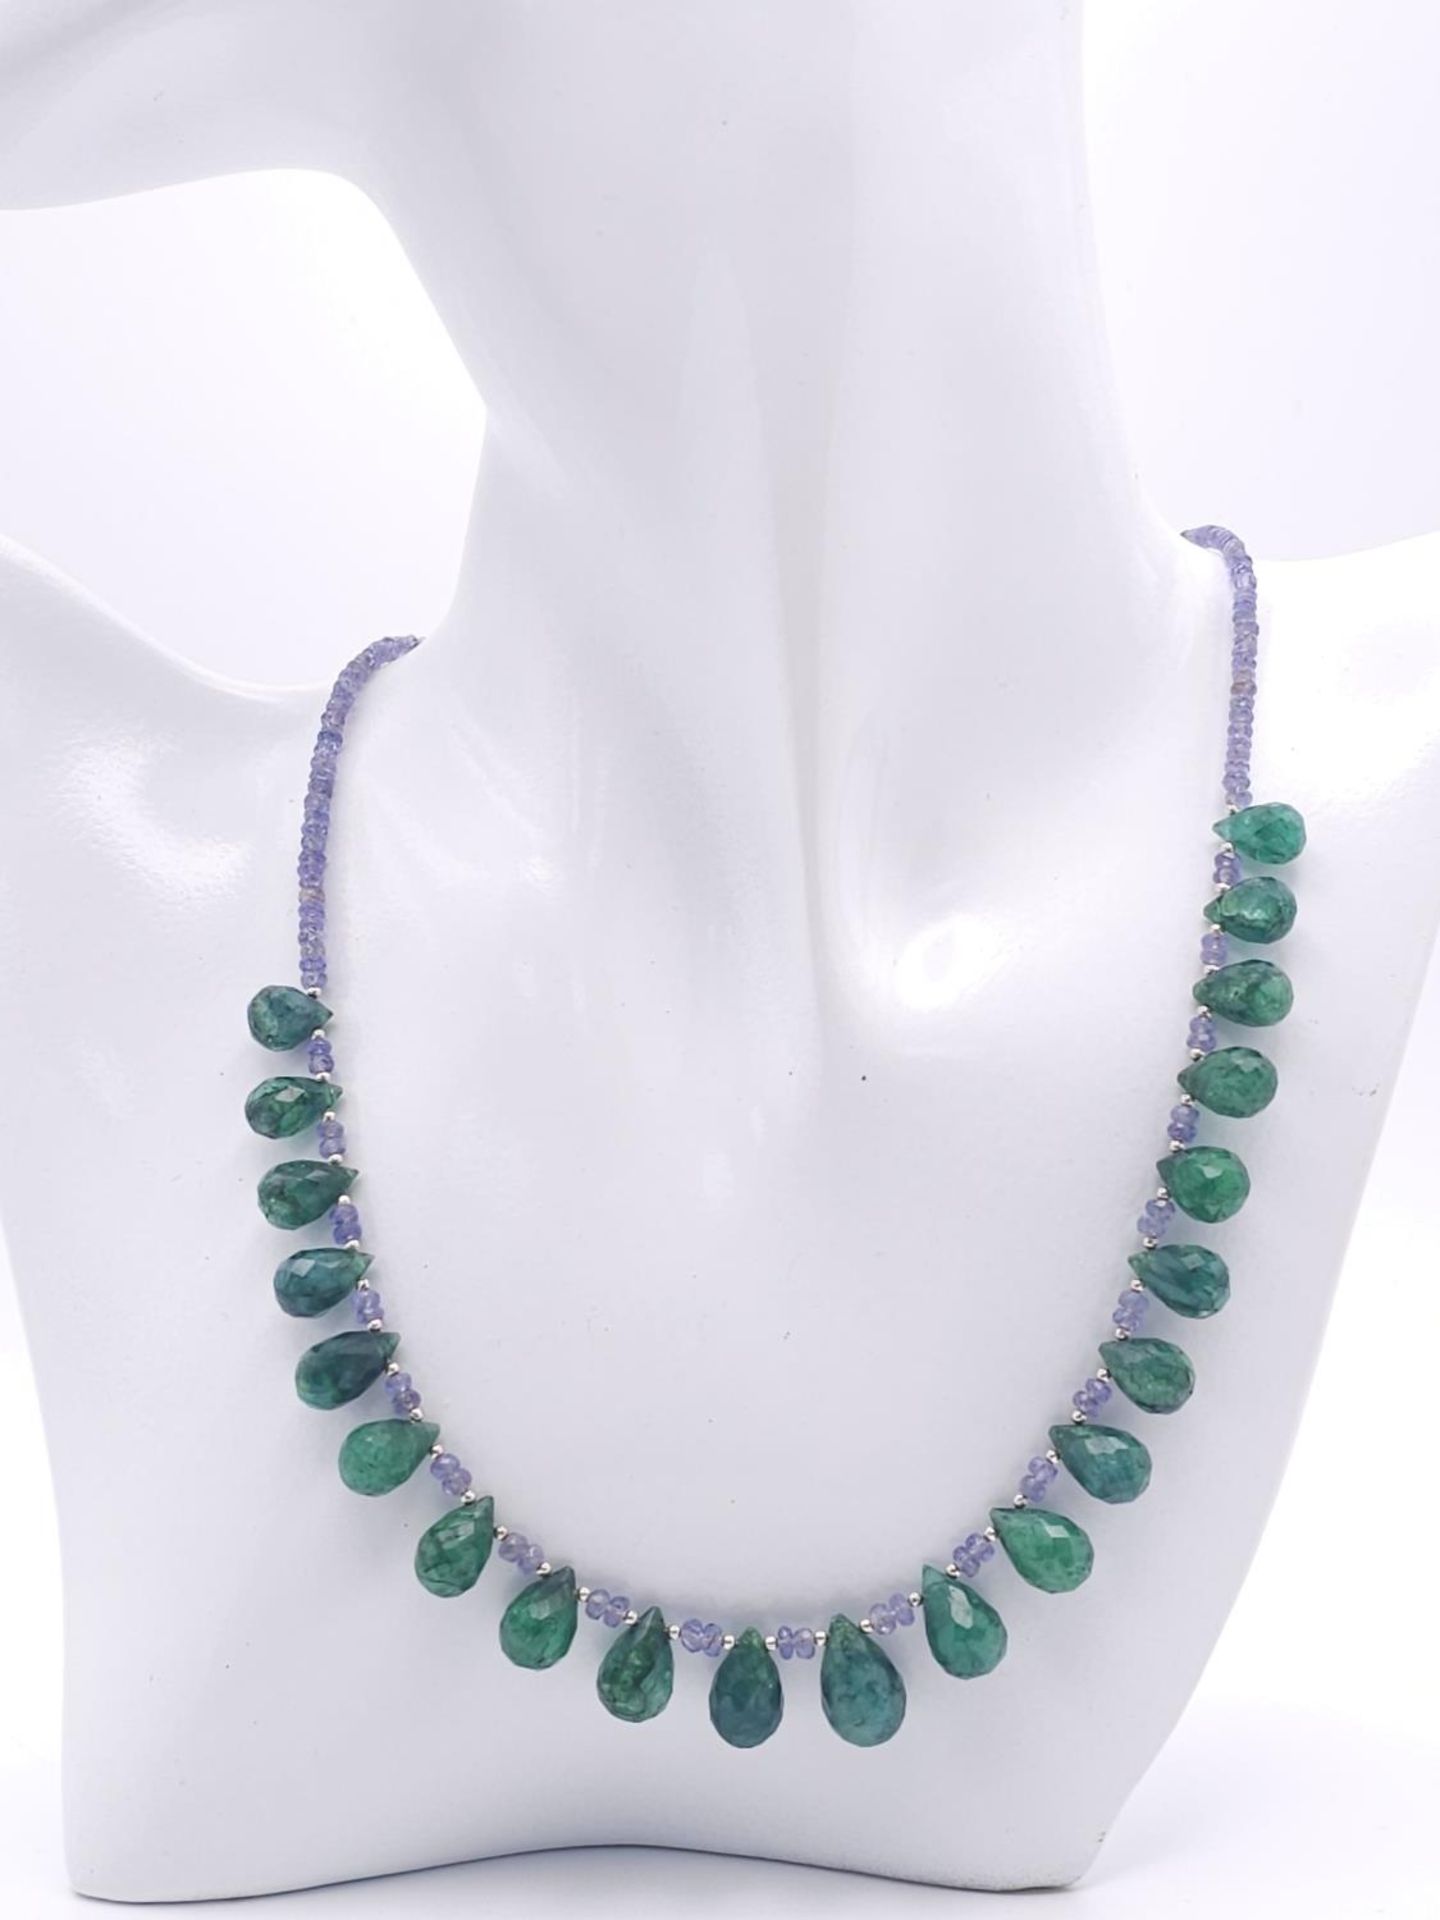 A 125ctw Tanzanite Gemstone Single Strand Necklace with Emerald Drops. 925 Silver Clasp. 42cm. - Image 4 of 4